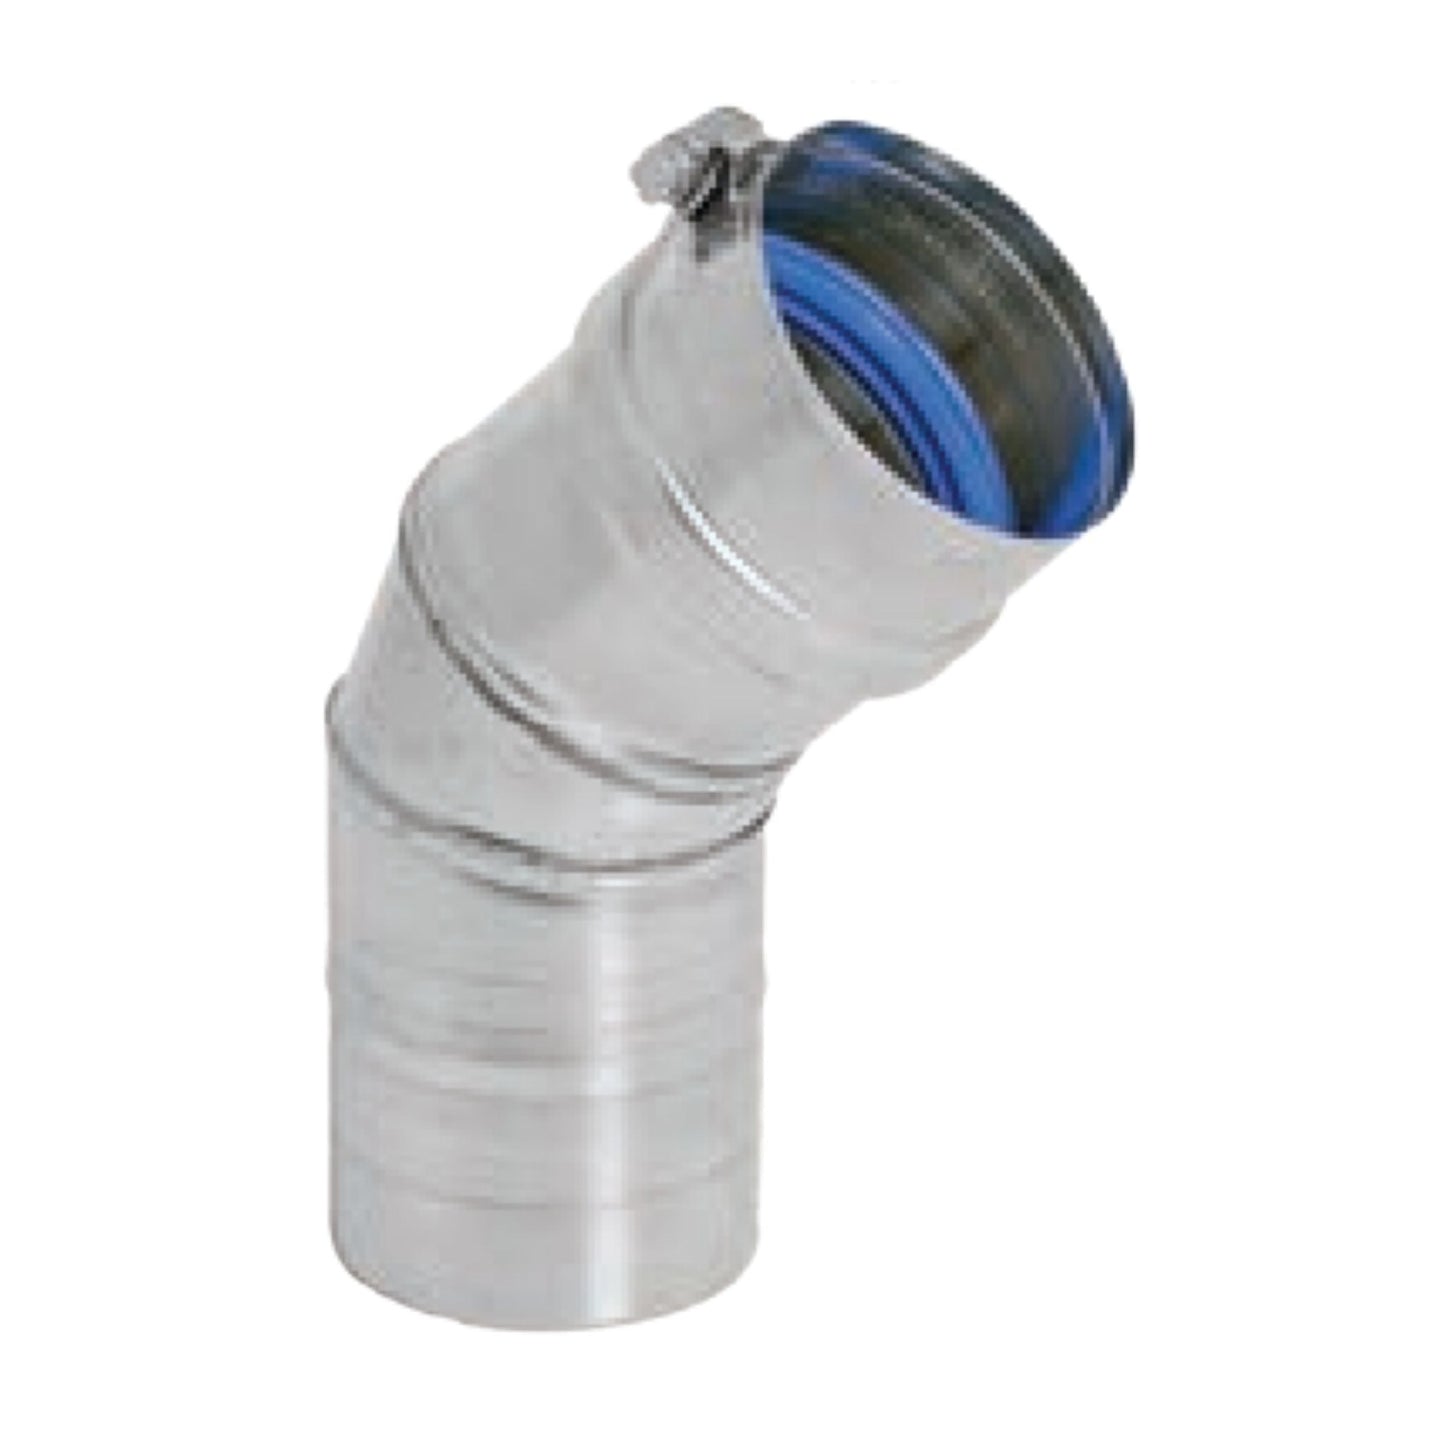 DuraVent FasNSeal 4" 45 Degree 29-4C Stainless Steel Elbow